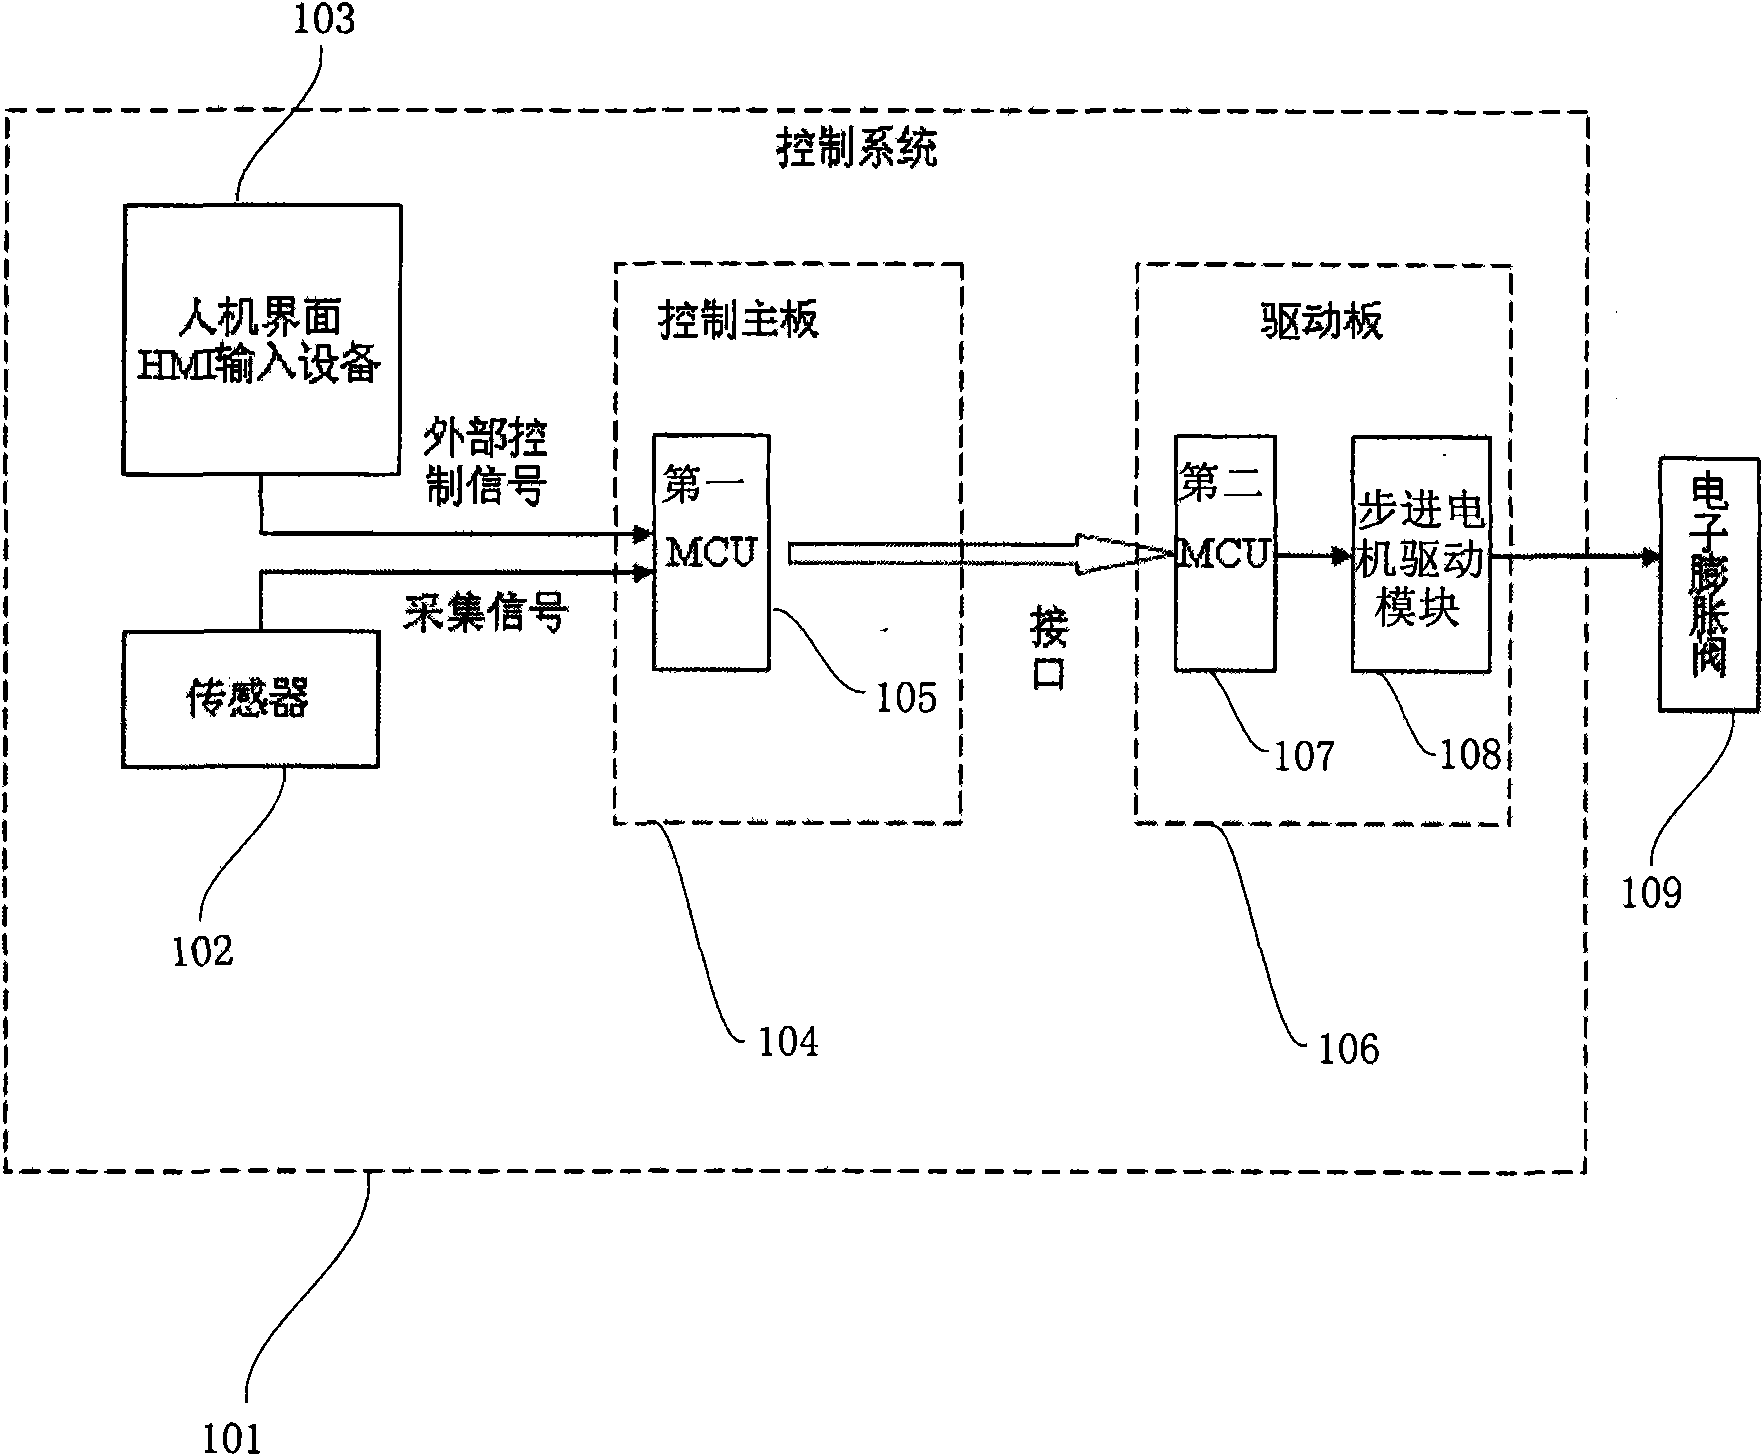 Control system of electronic expansion valve